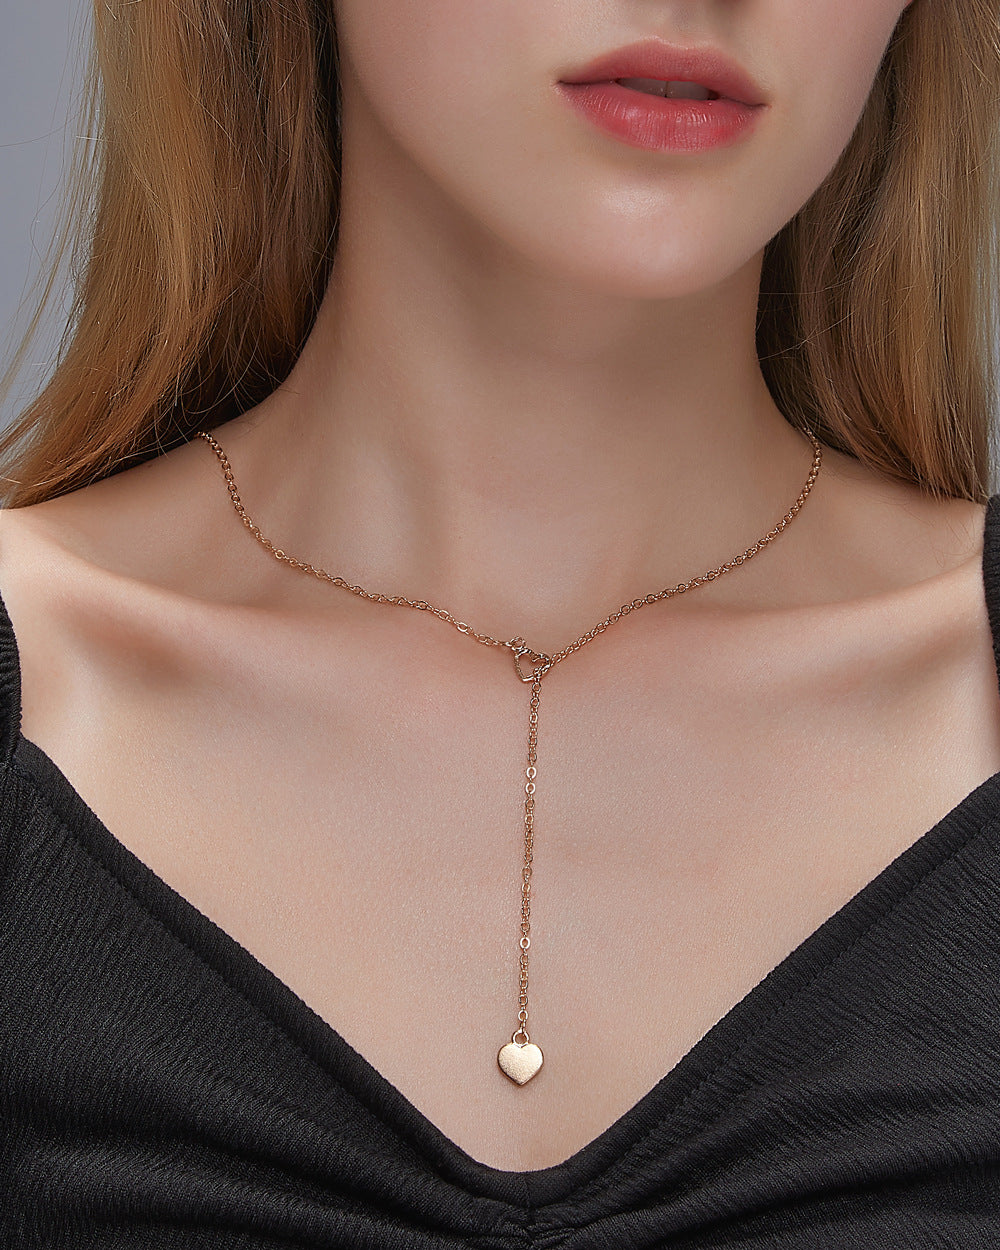 New Simple Love-shaped Wild Long Heart Alloy Pendant Necklace Clavicle Chain For Women